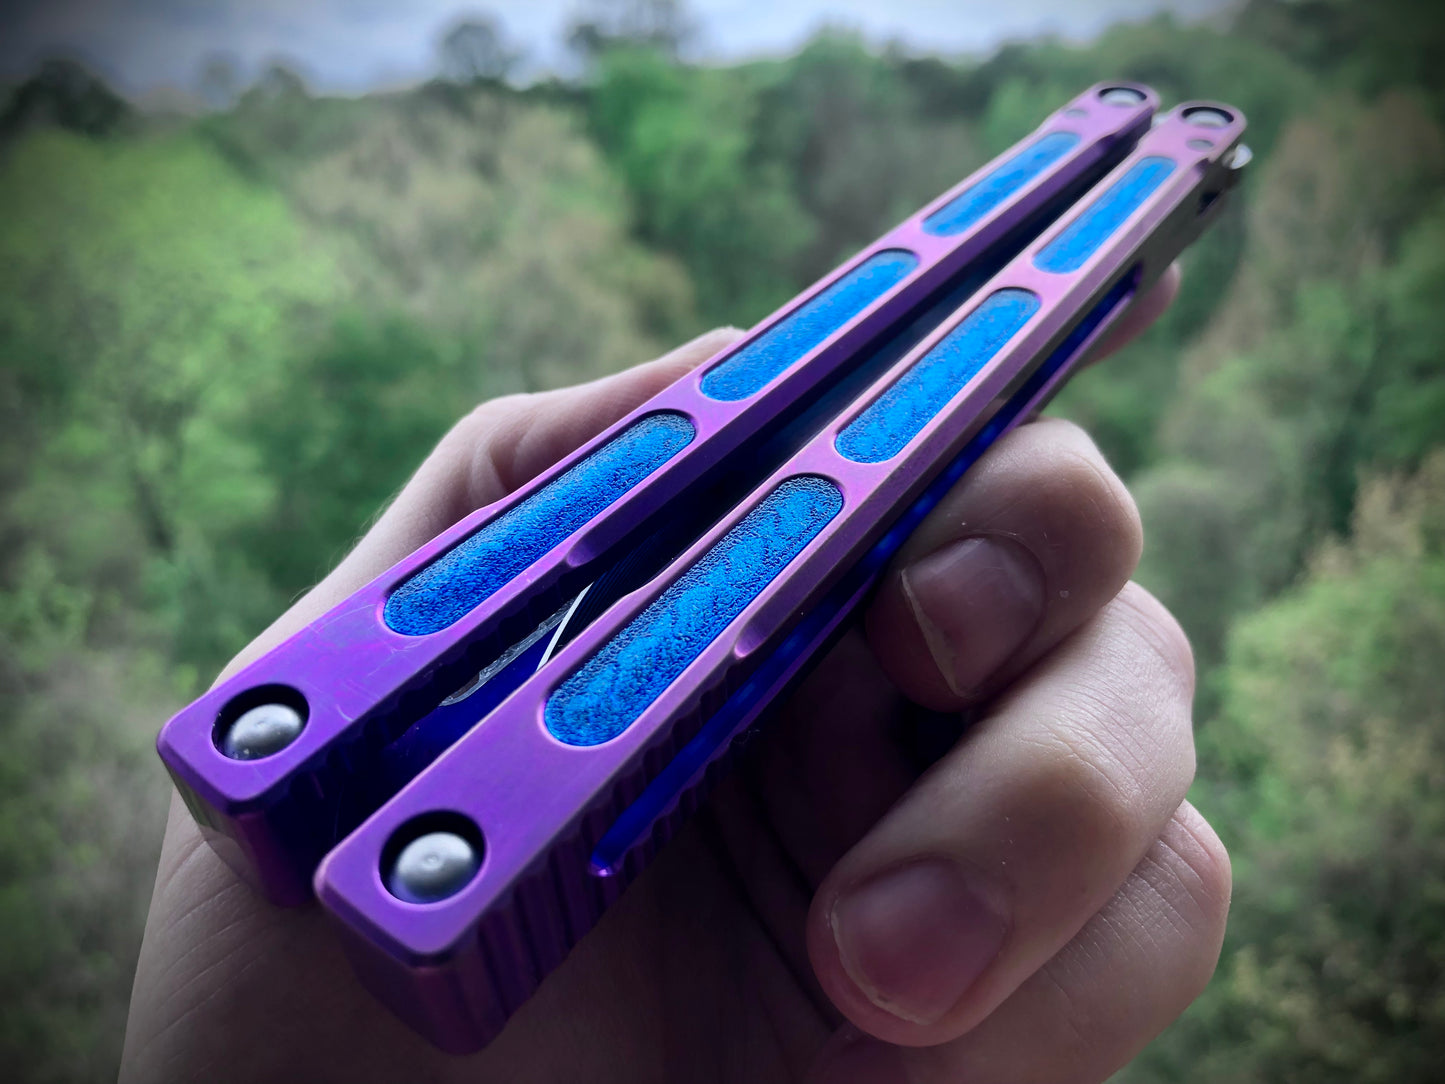 Zippy mods for the MachineWise Opus, Serif, Prysma, and SlifT v2 balisongs to change the balance, add grip, and eliminate the ring.